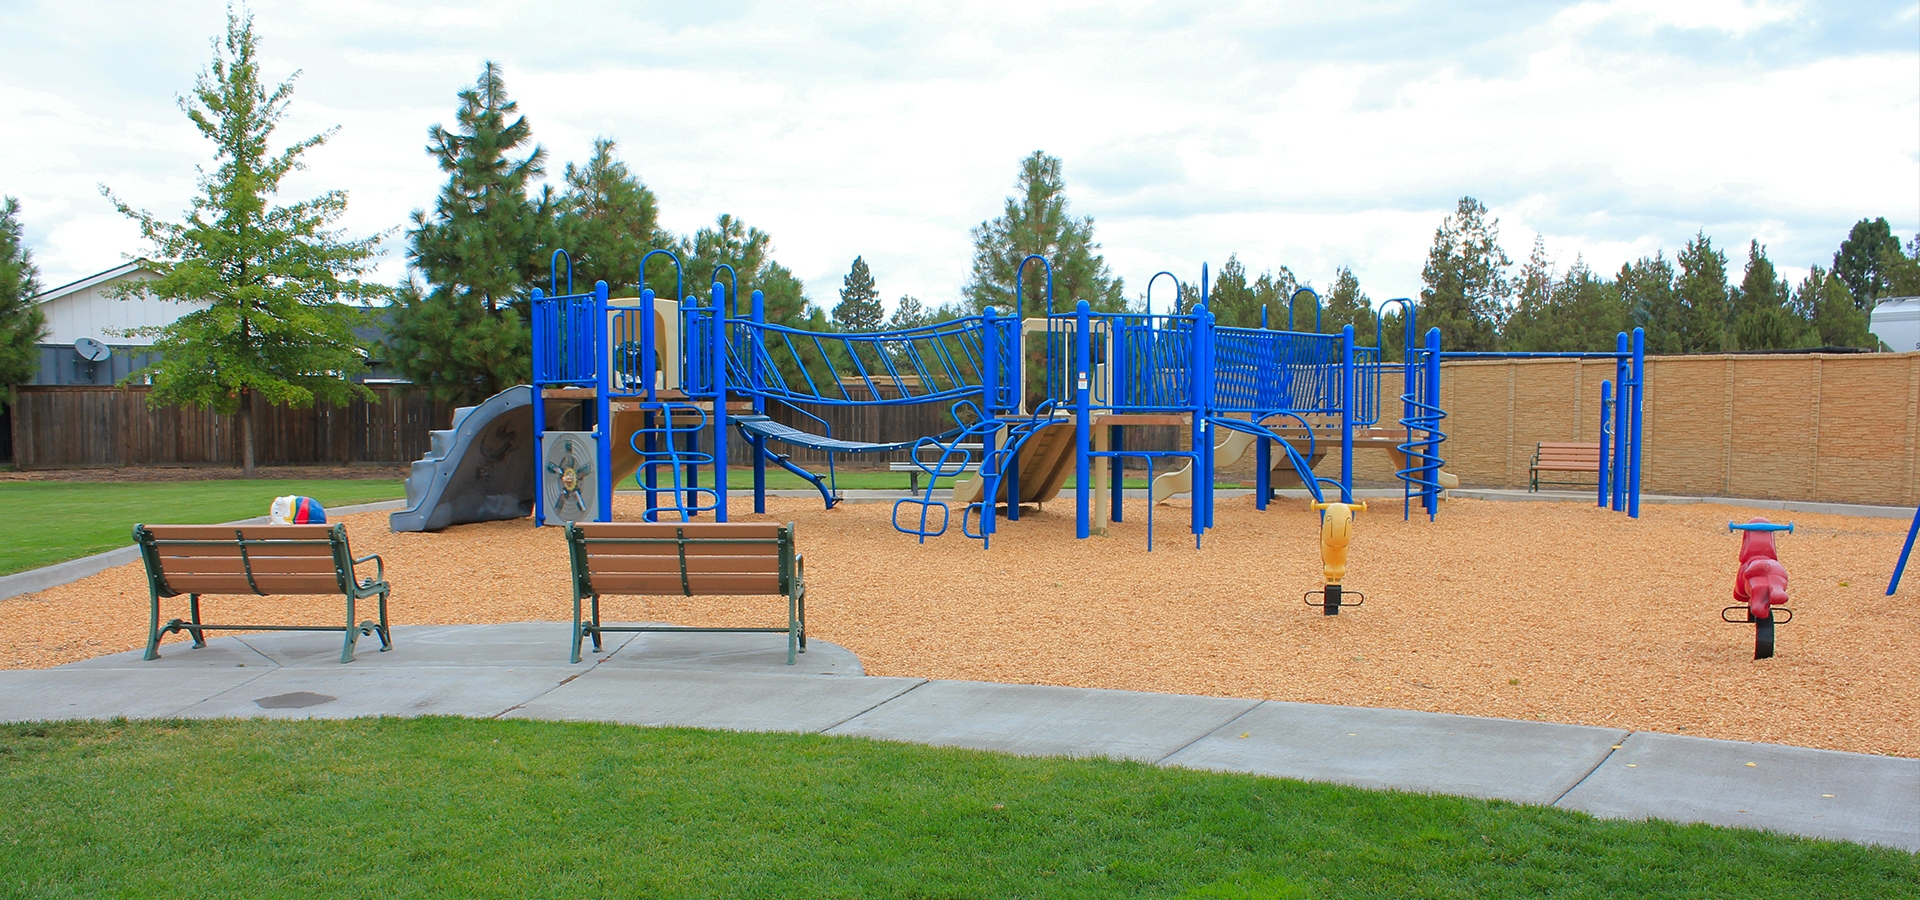 The playground at Foxborough Park in Bend.